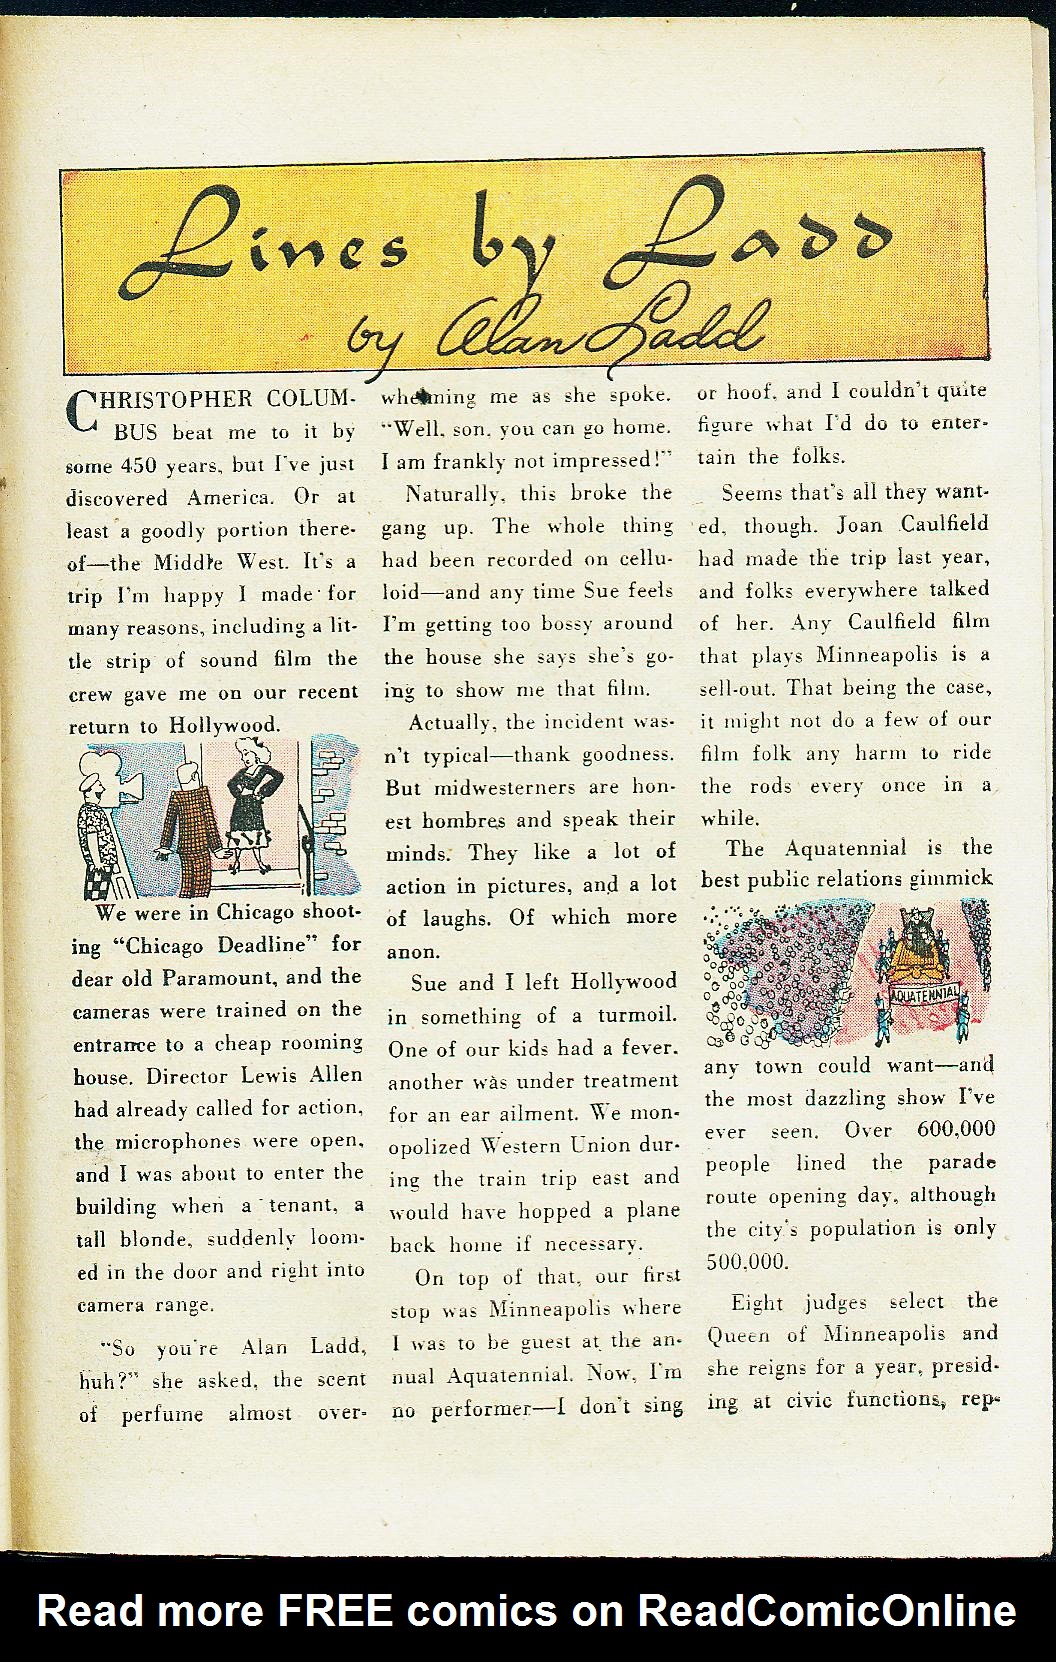 Read online Adventures of Alan Ladd comic -  Issue #1 - 41